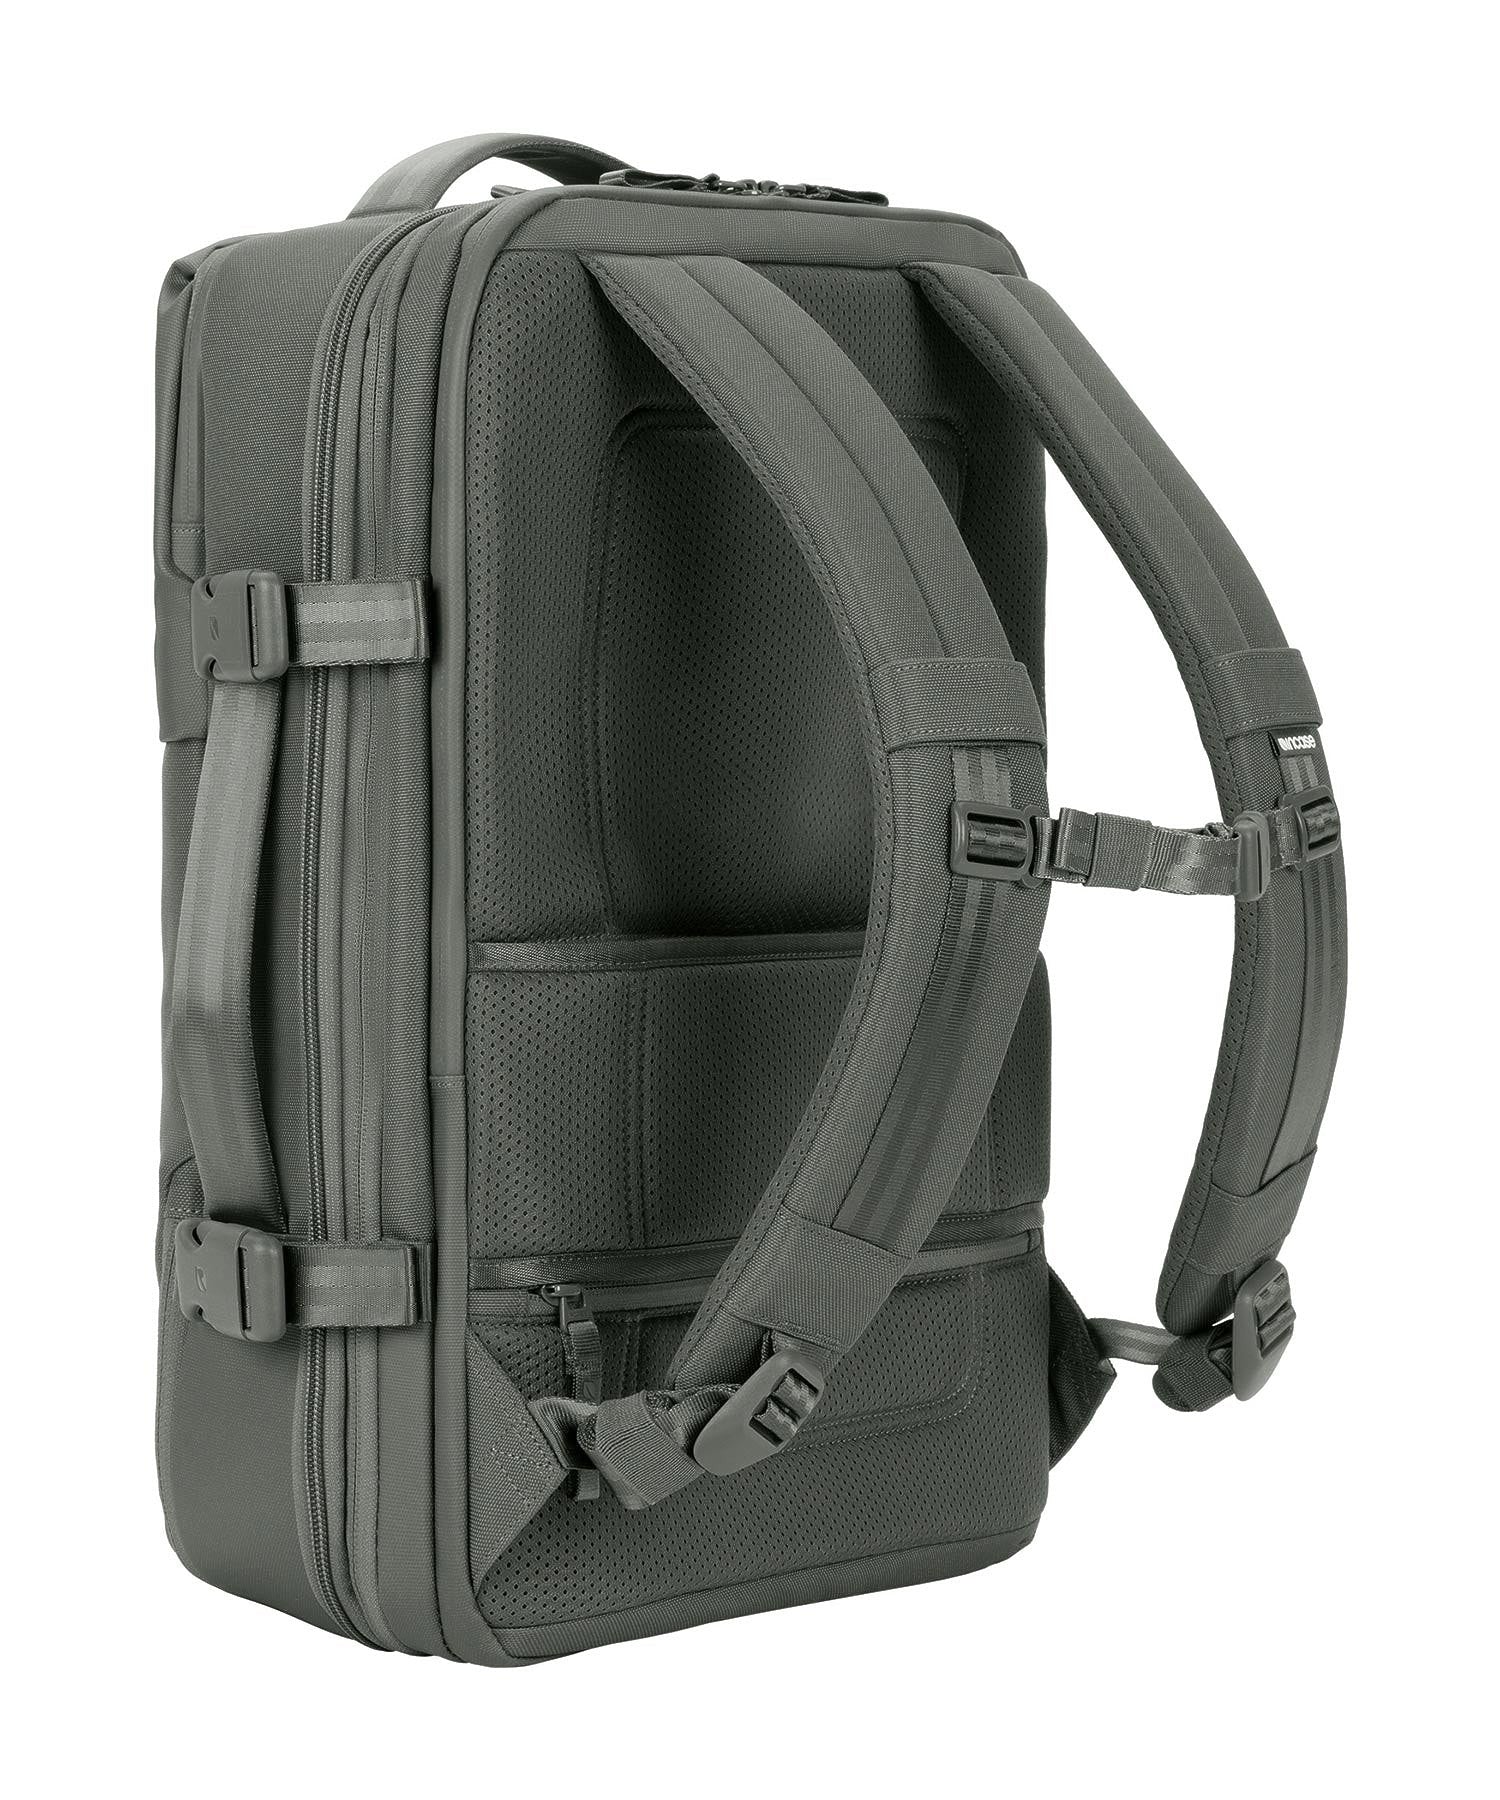 INCO100682-SIV Incase A R C Travel Pack - Smoked Ivy